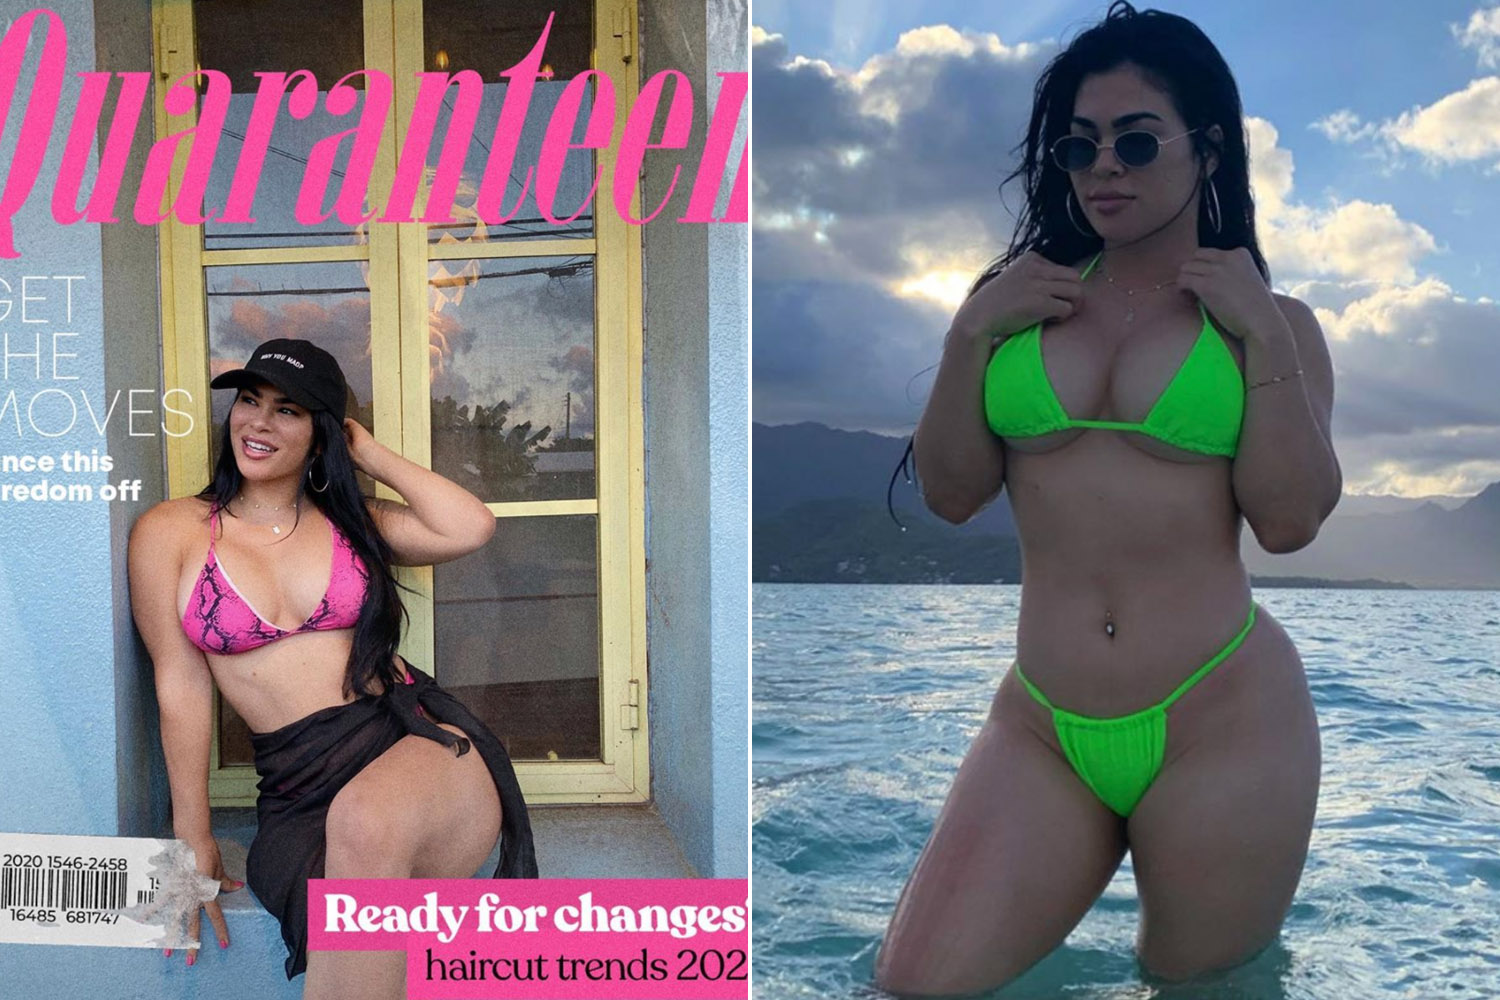 cheryl revell recommends rachael ostovich sexy pic